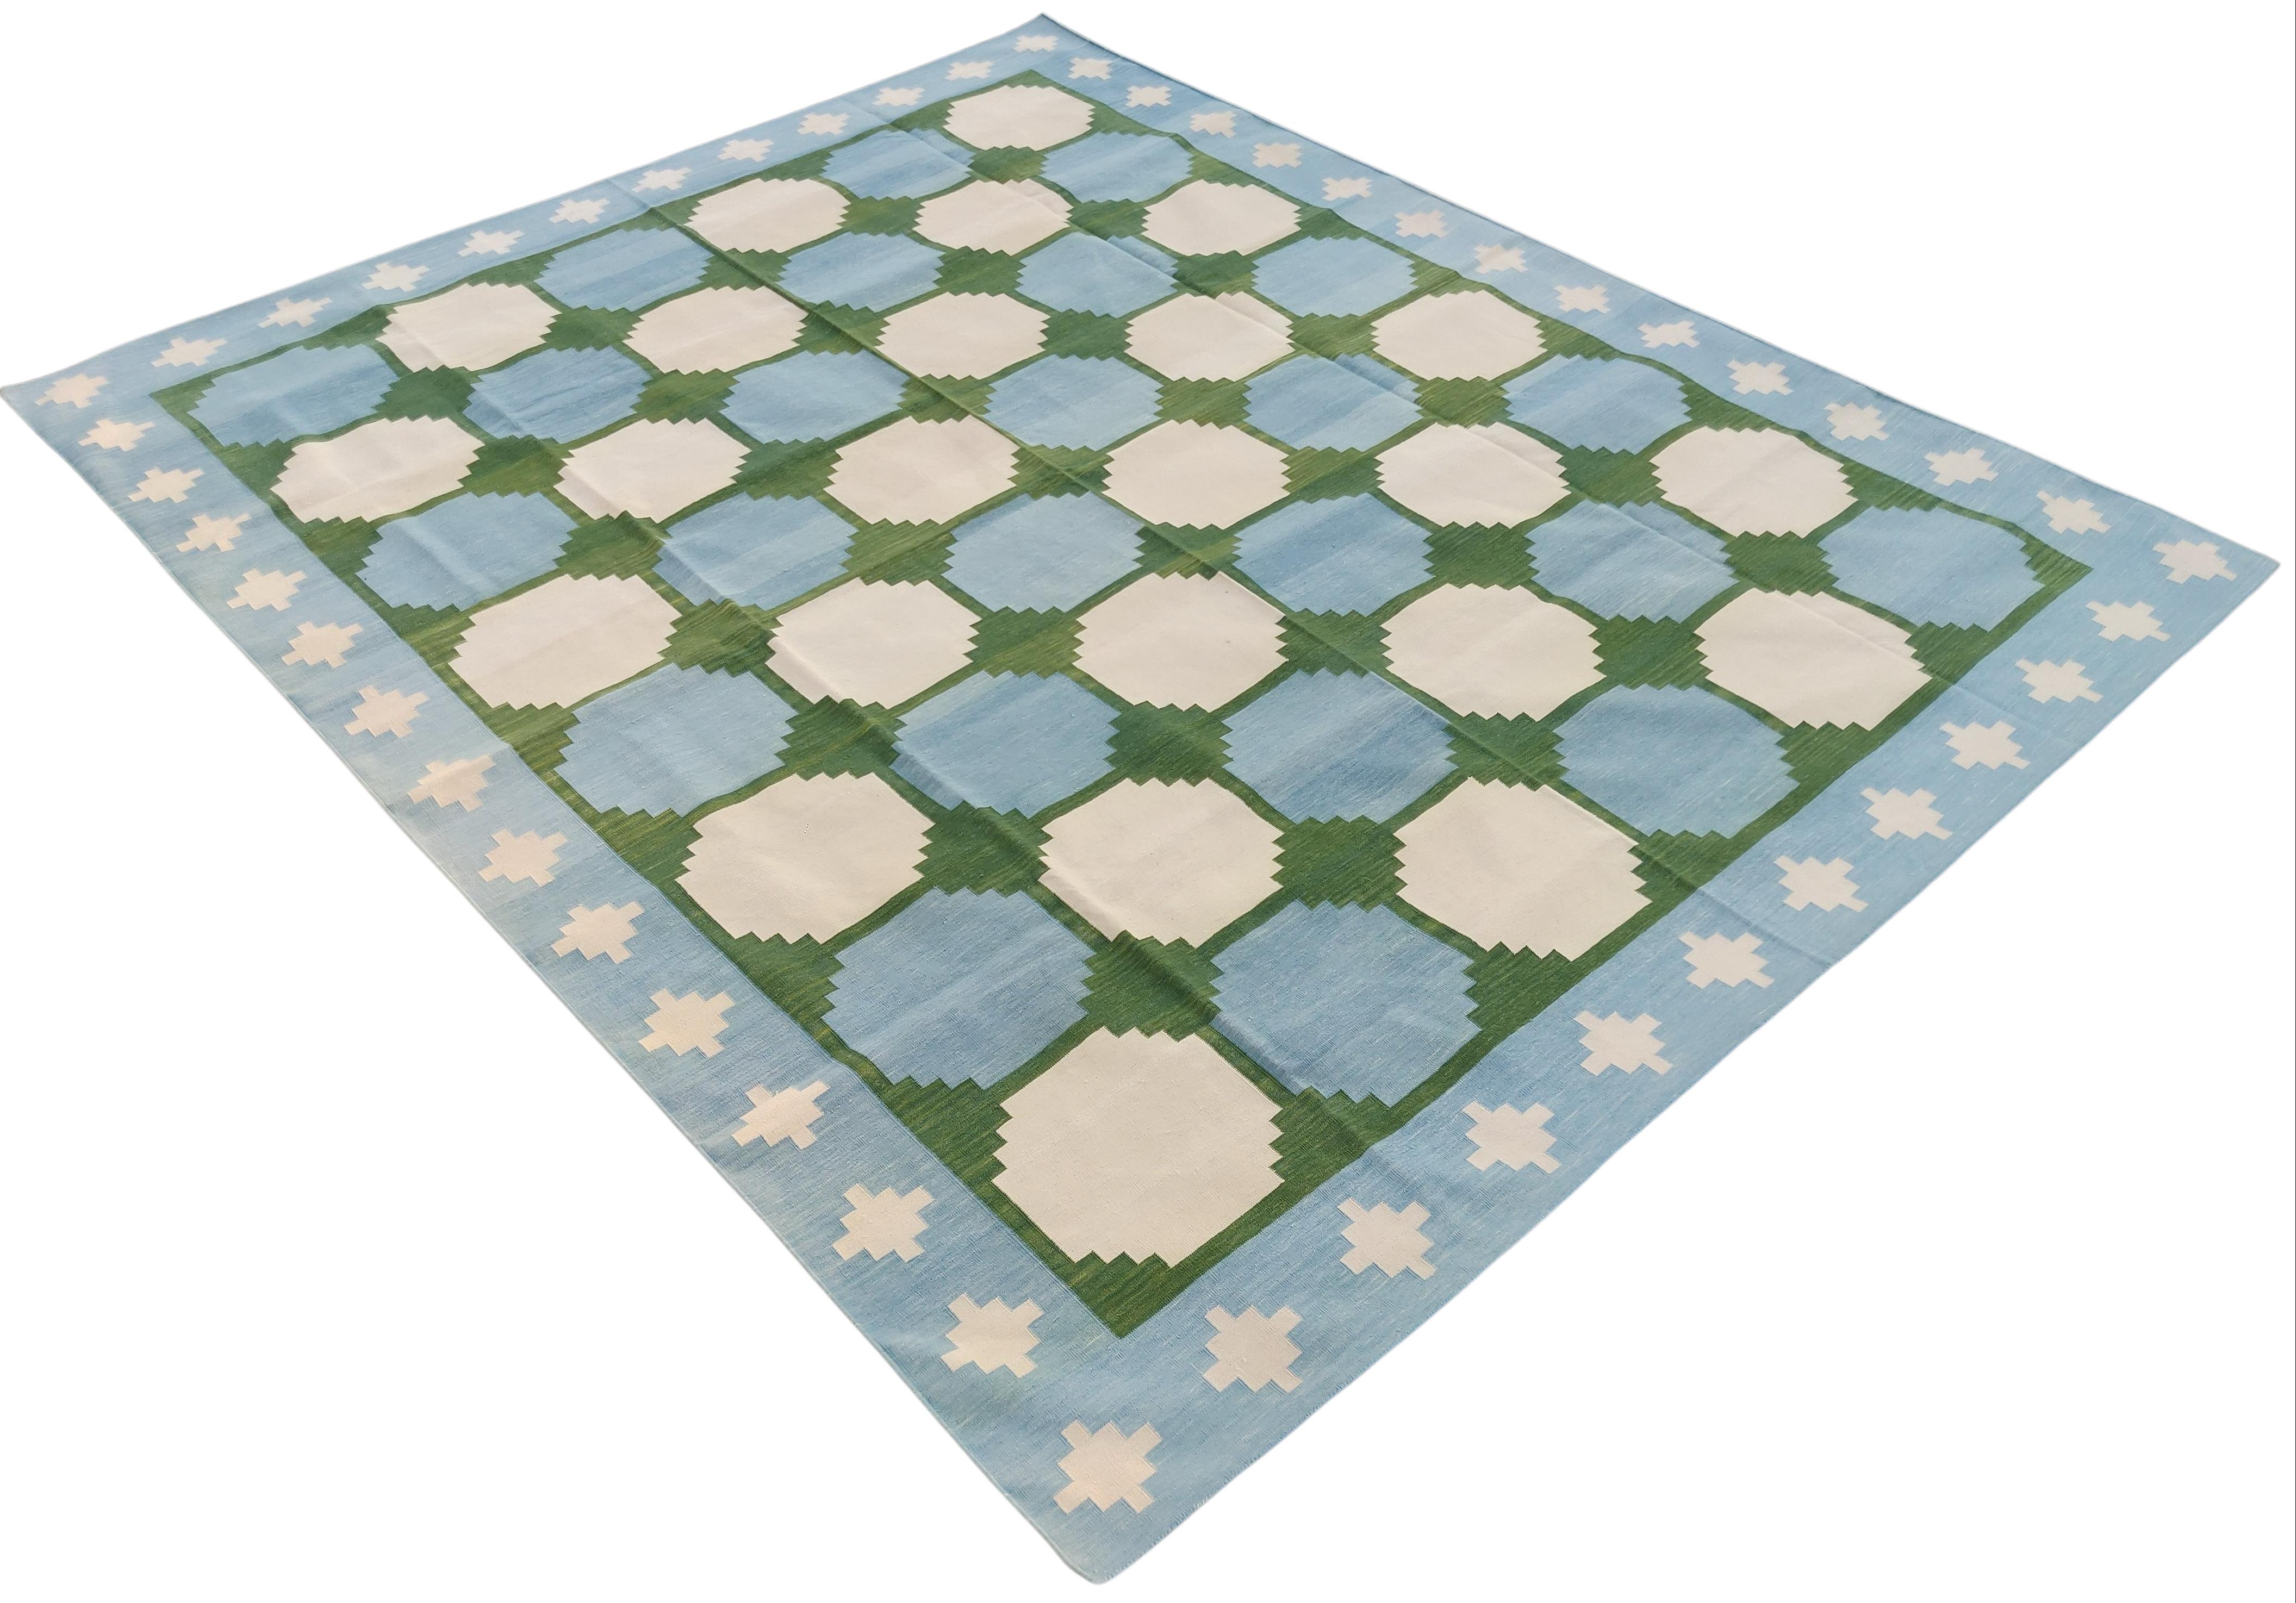 Cotton Natural Vegetable Dyed Forest Green , Sky Blue And Cream Tile Patterned Swedish Rug-14'x16'
These special flat-weave dhurries are hand-woven with 15 ply 100% cotton yarn. Due to the special manufacturing techniques used to create our rugs,